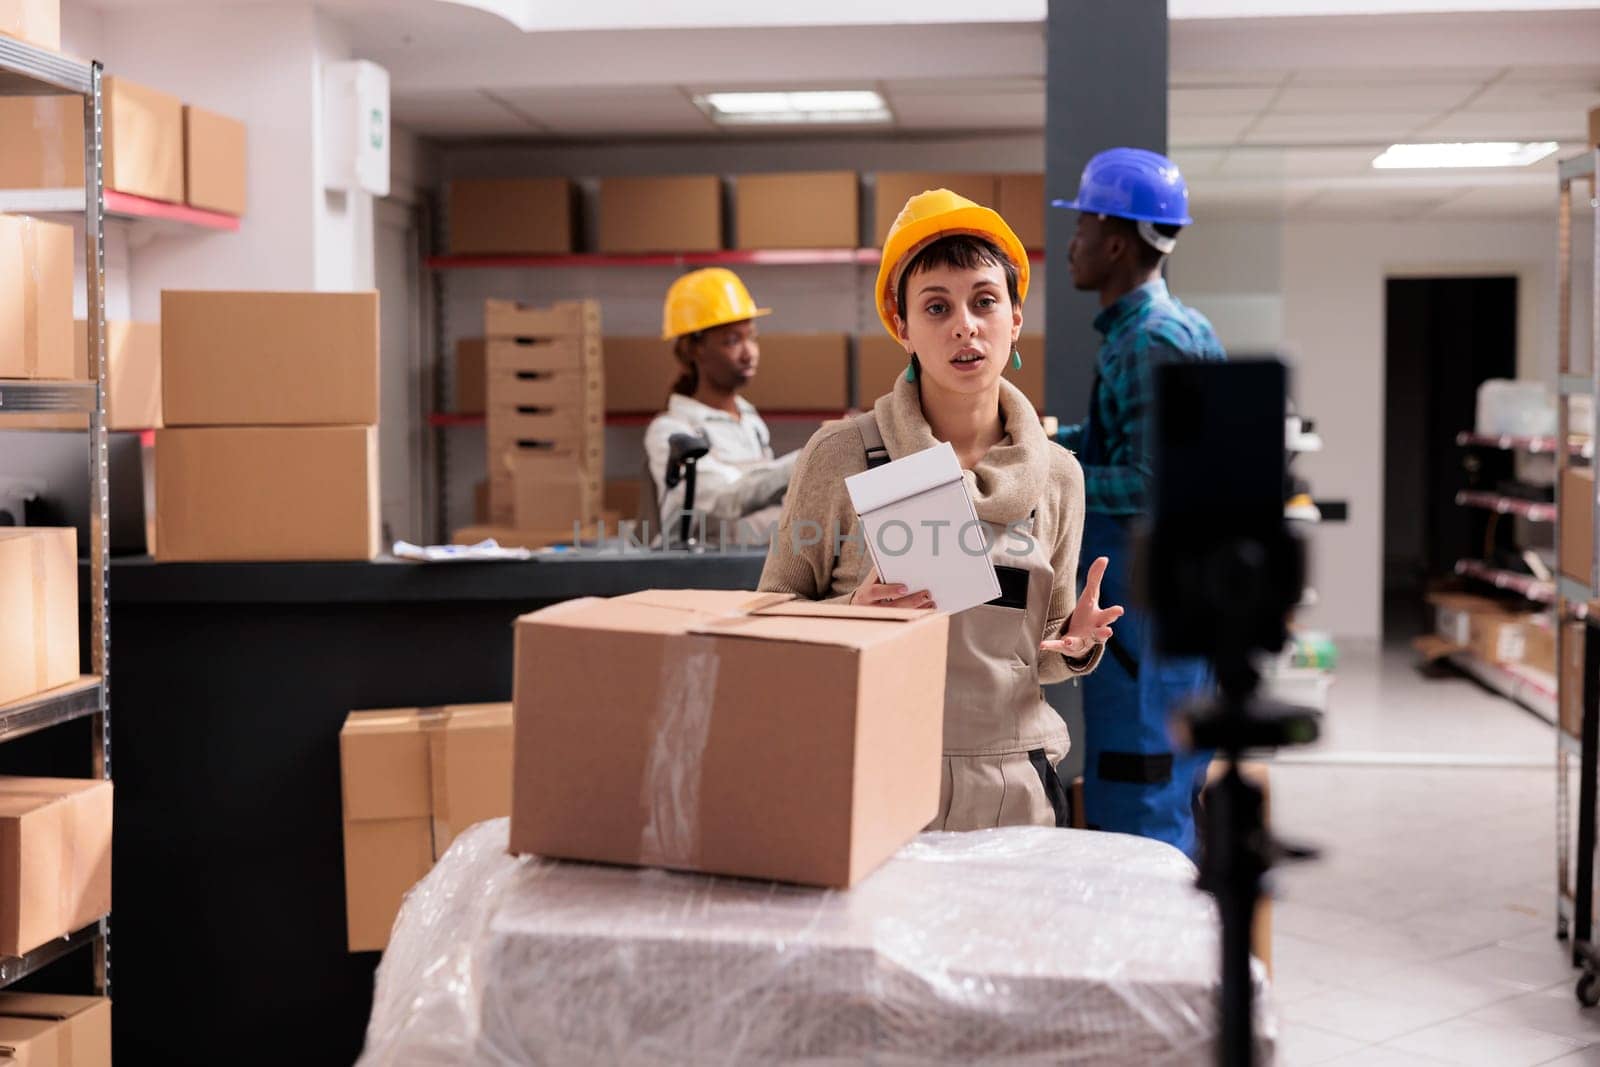 Retail storehouse worker recording smartphone video with goods unpacking. Young warehouse employee explaining stock supply management and order packing on mobile phone camera